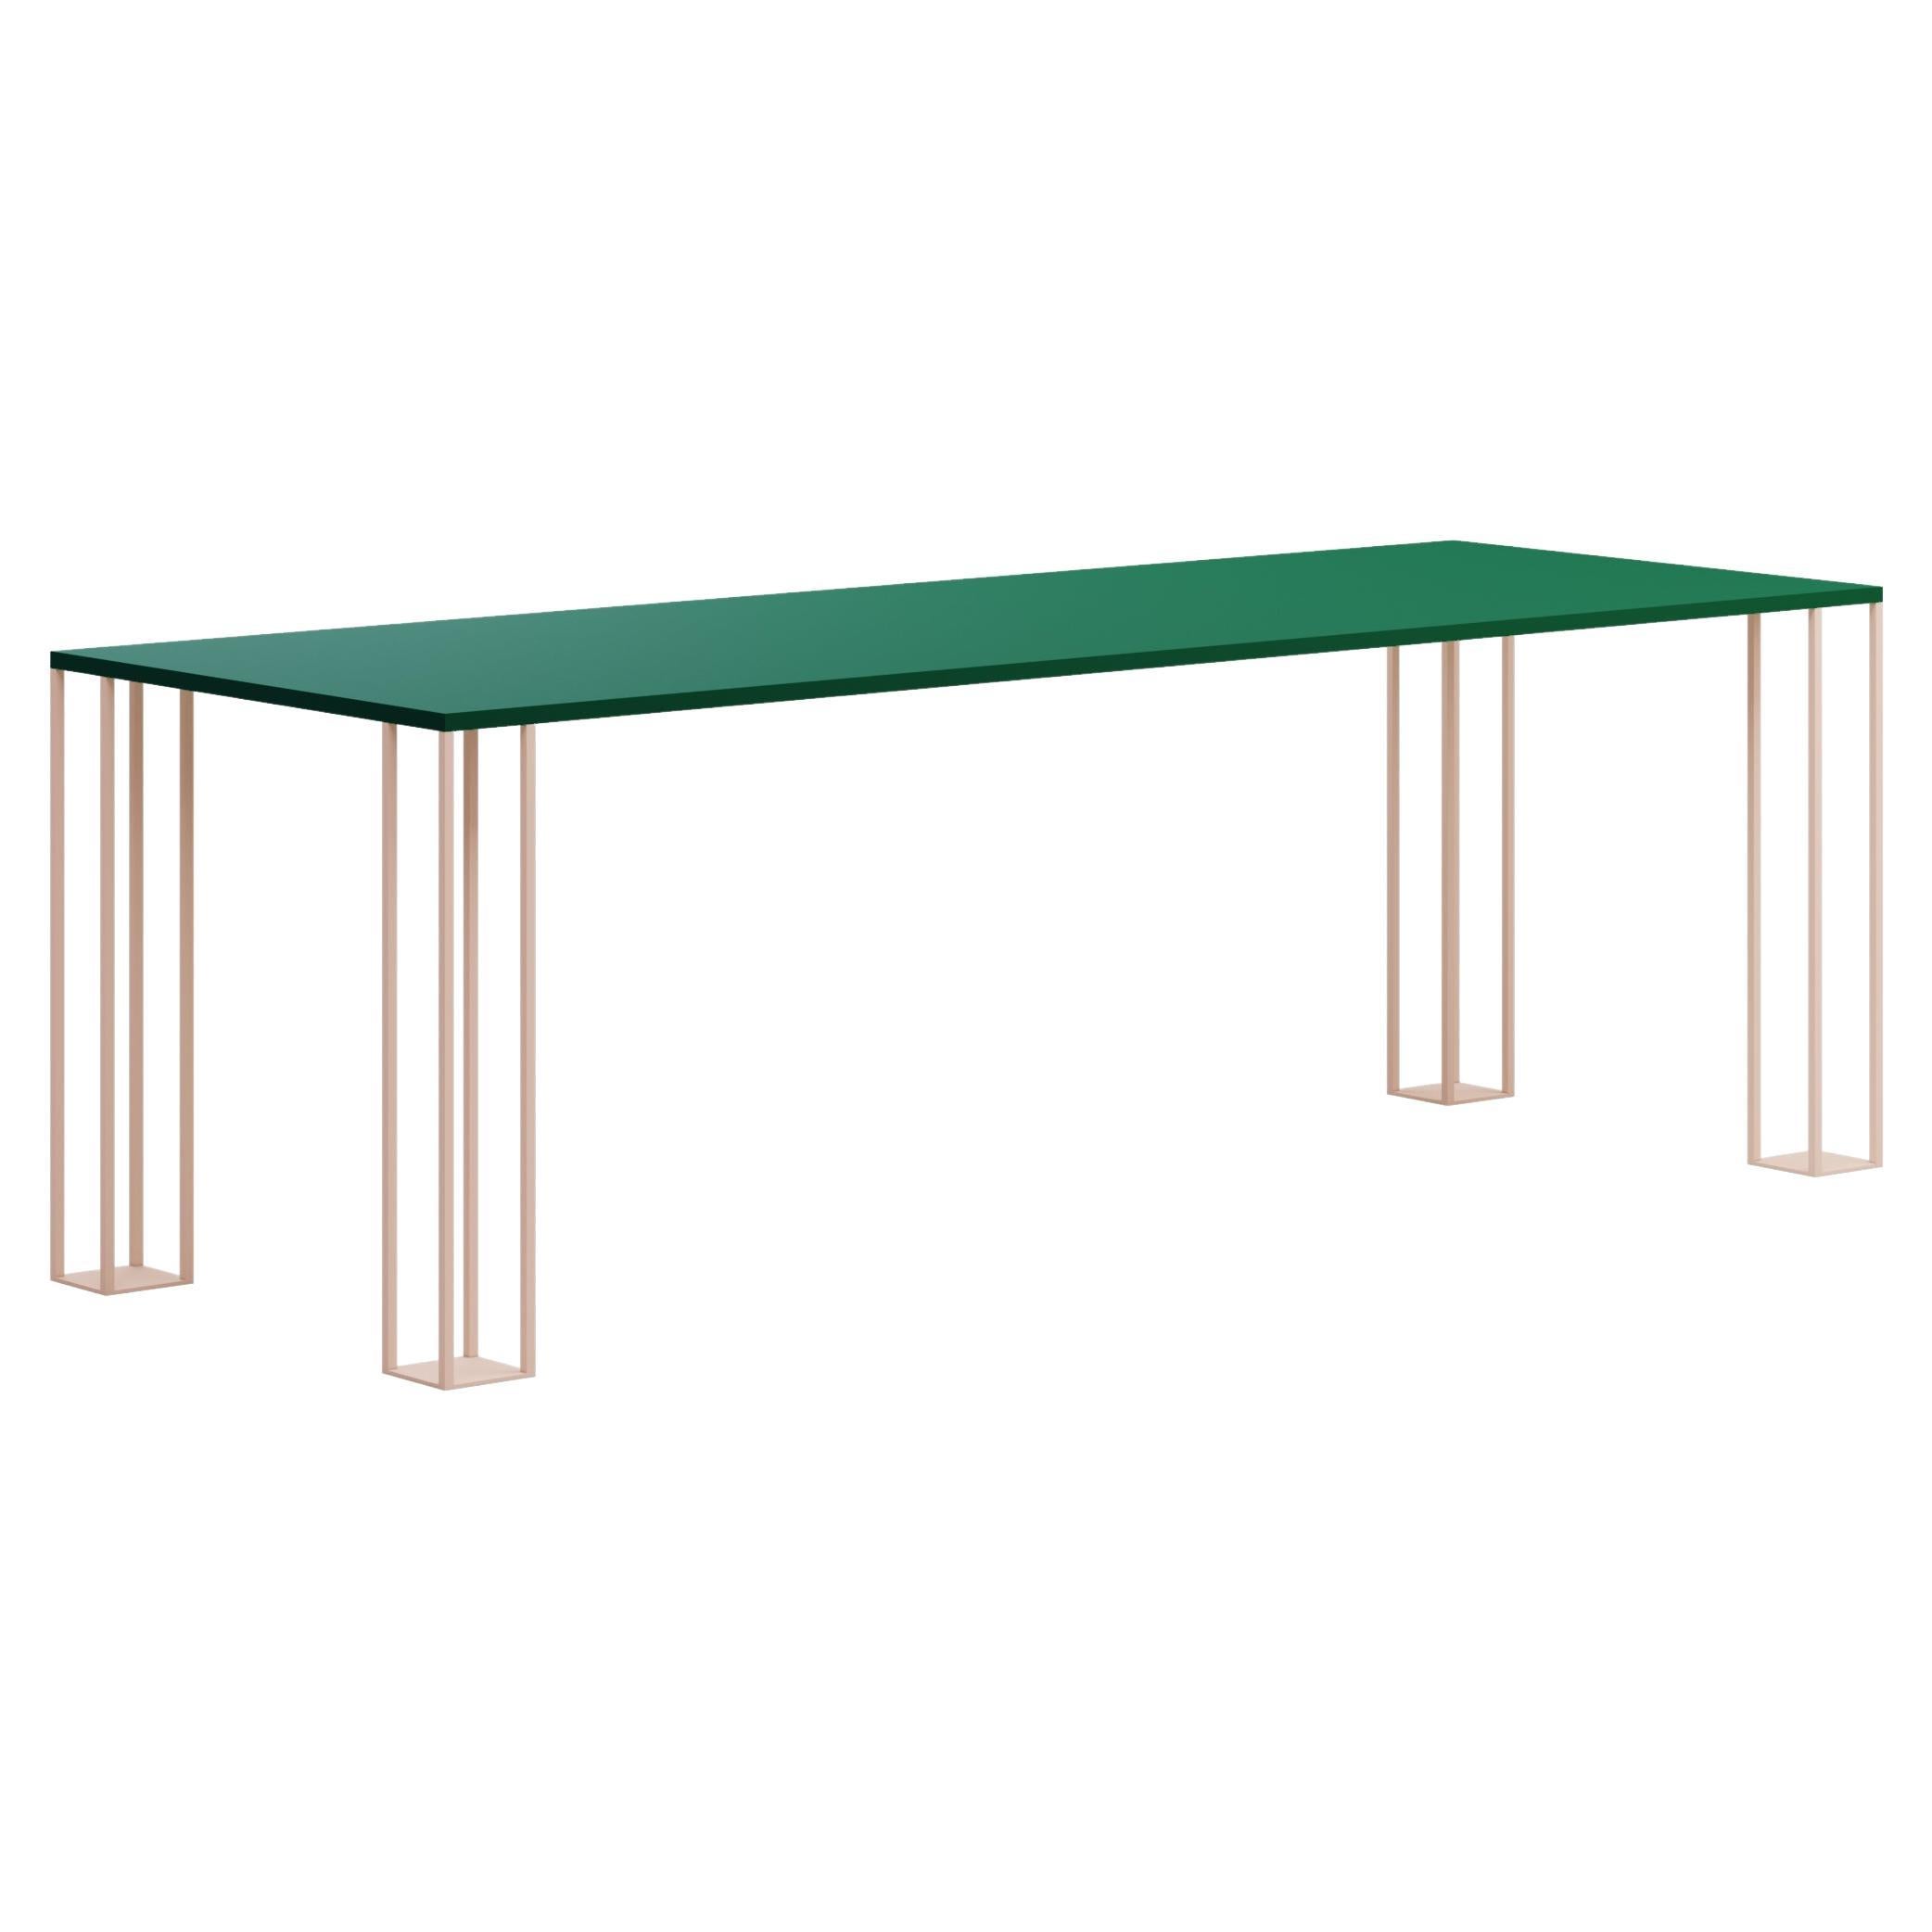 XYZ Steel Dining Table green leaf / peach pink For Sale